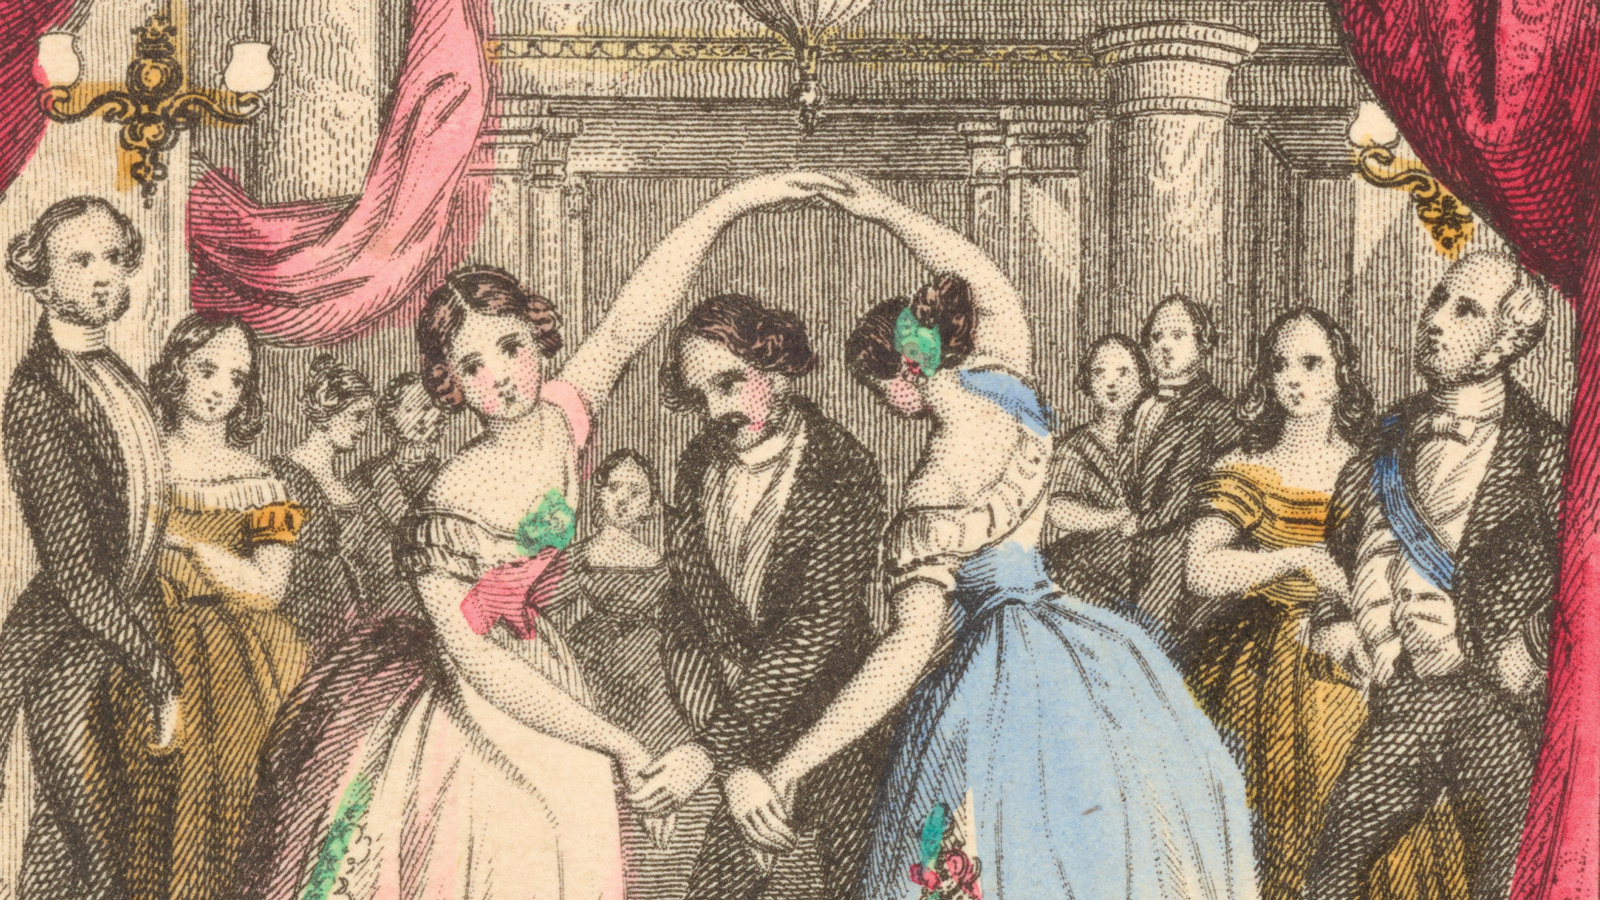 Illustration of two women dancing in large dresses at a ball